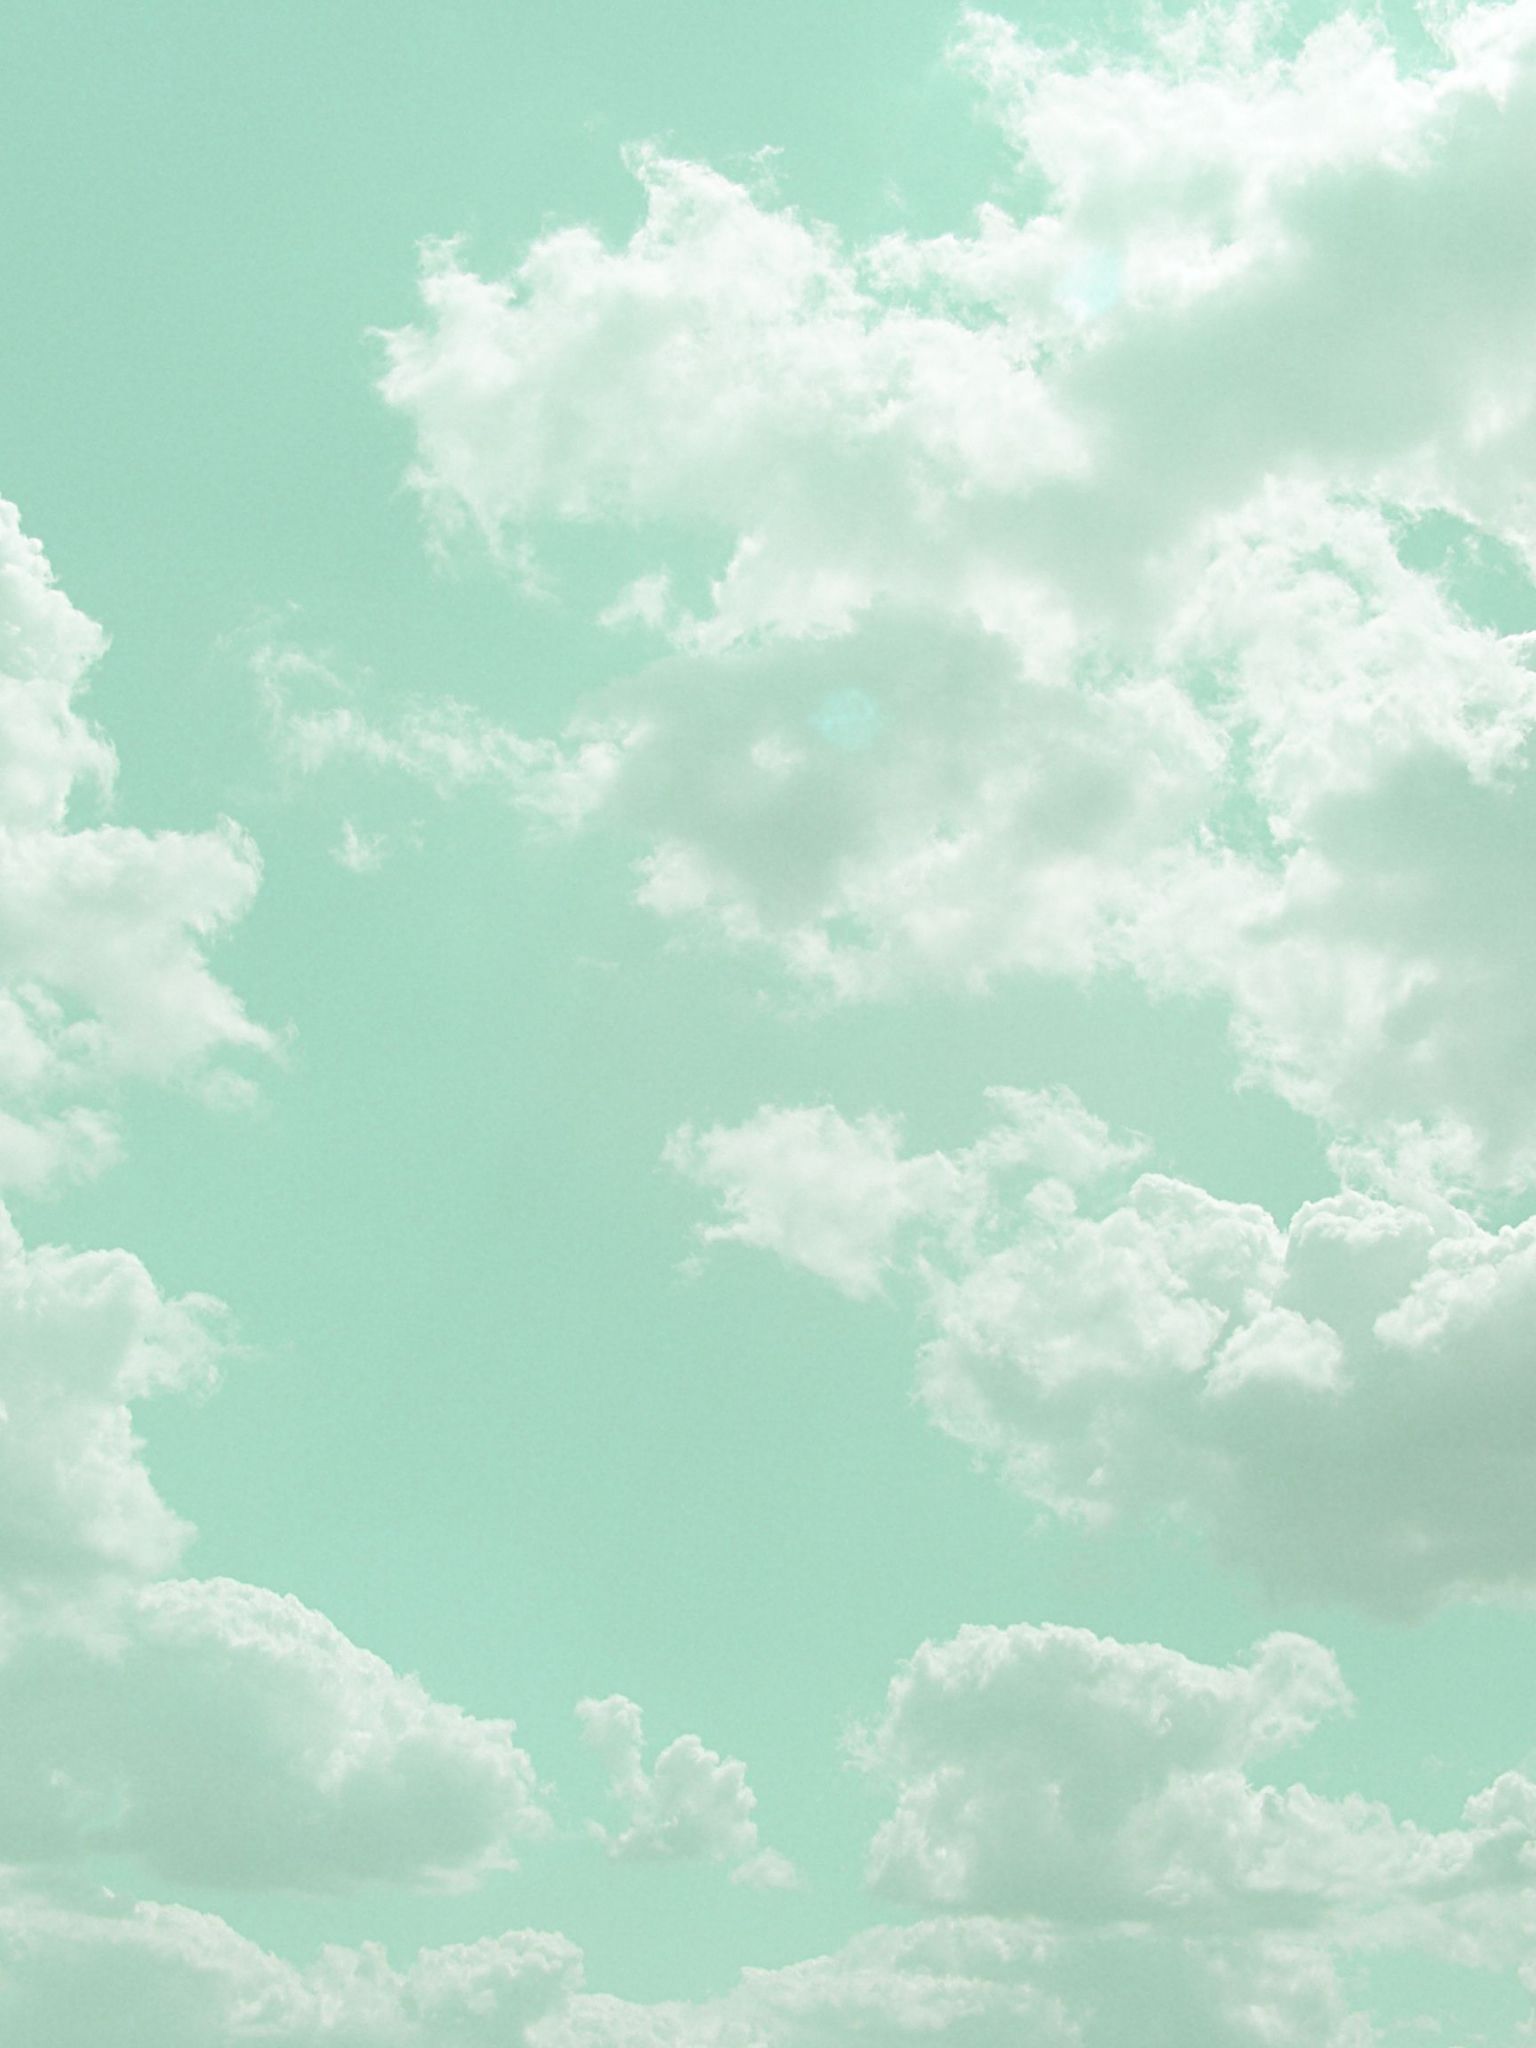 A photo of a blue sky with white clouds. - Soft green